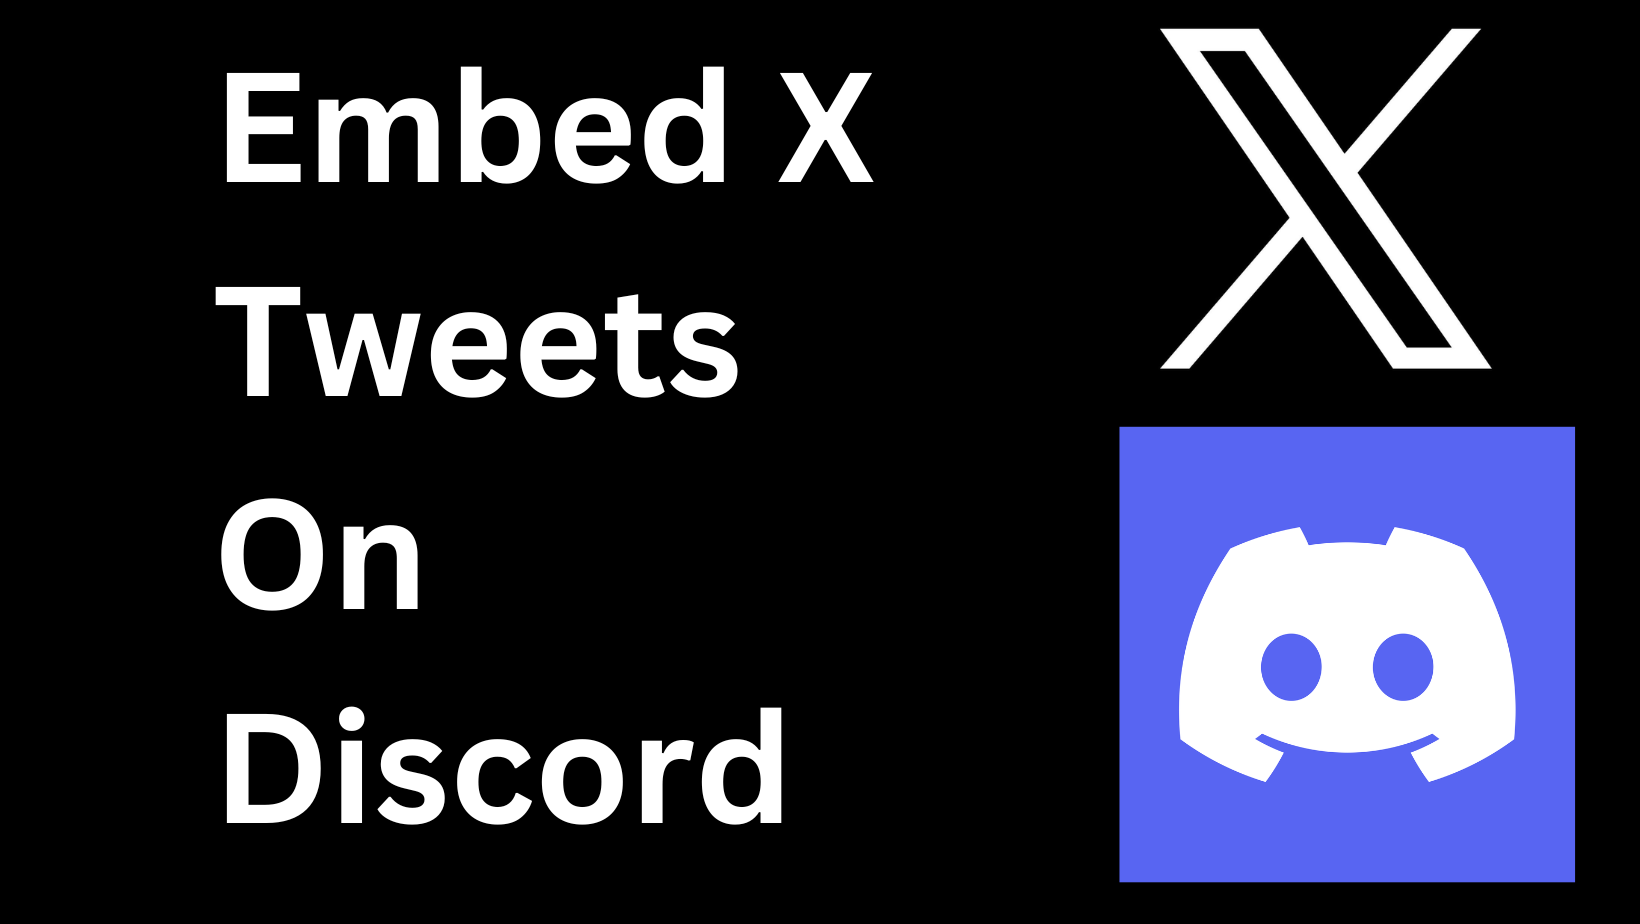 How to embed X Tweets on Discord